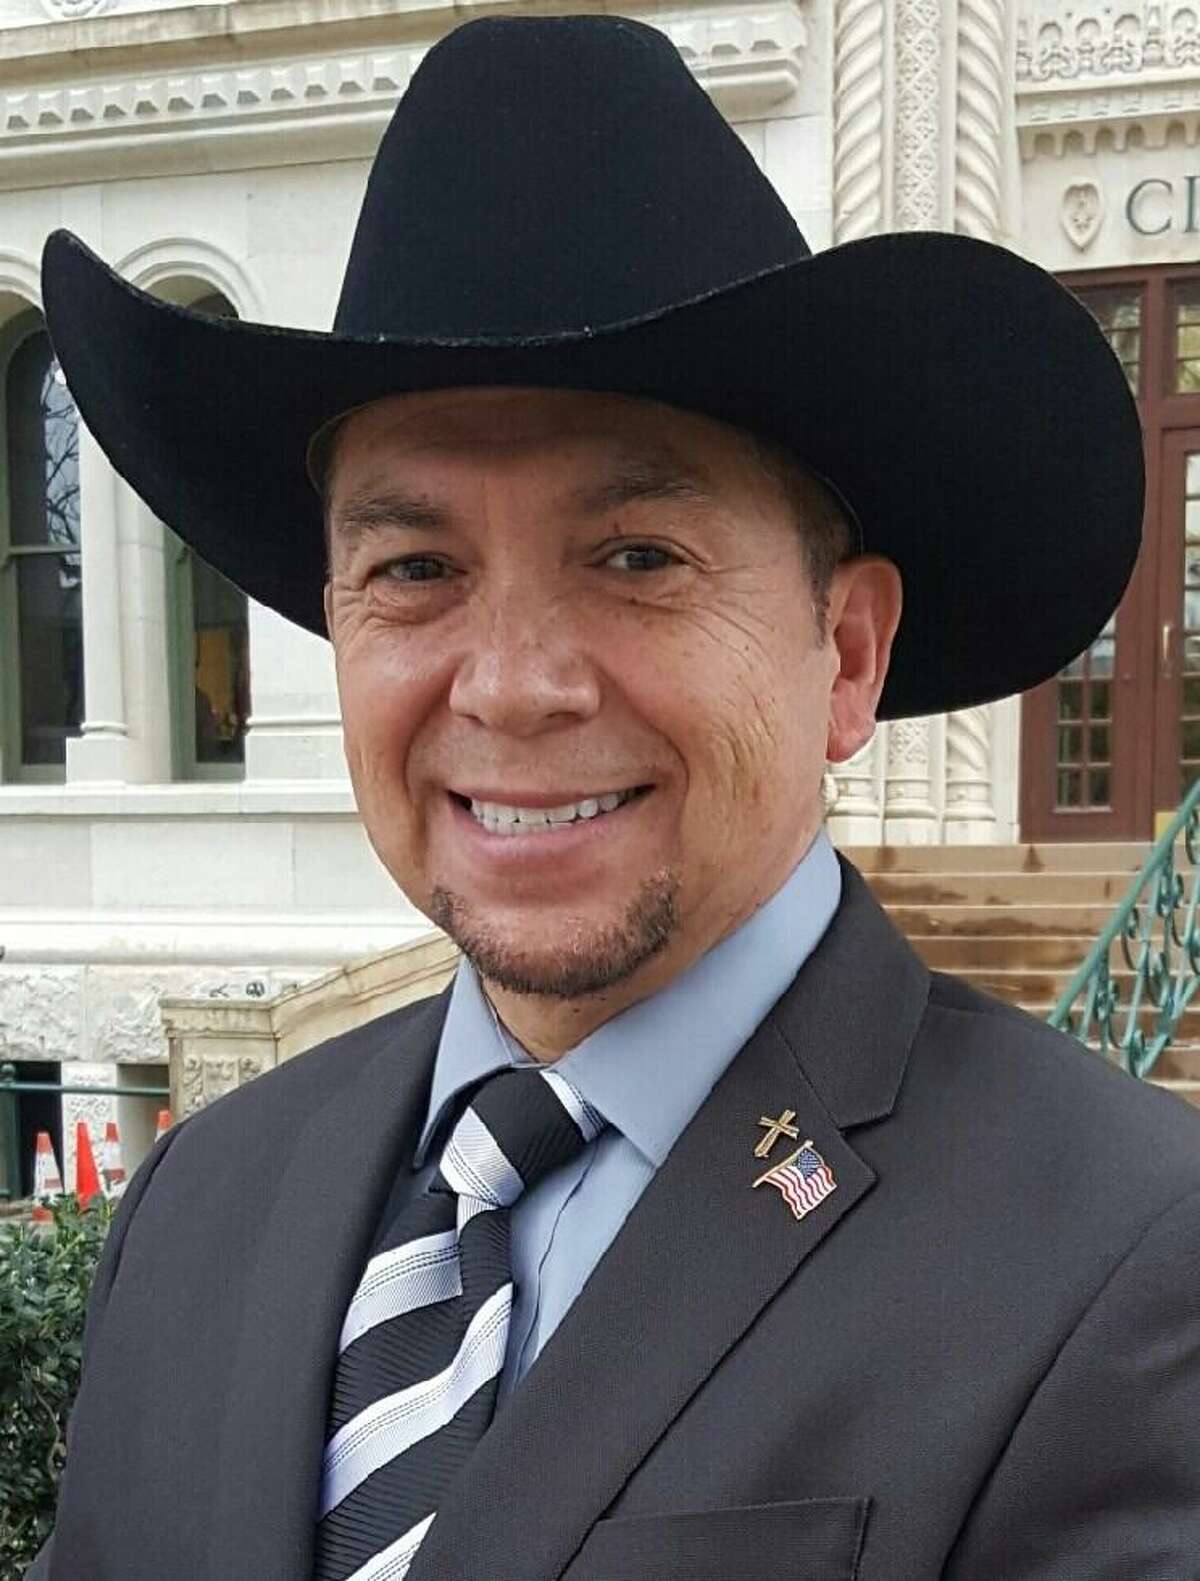 Johnny Arredondo, 61, who is retired and serves as a college and high school basketball official, is one of three contenders running for the District 4 San Antonio City Council seat in the May 6 municipal election. He will challenge incumbent Rey Saldaña and political newcomer Rey Guevara.